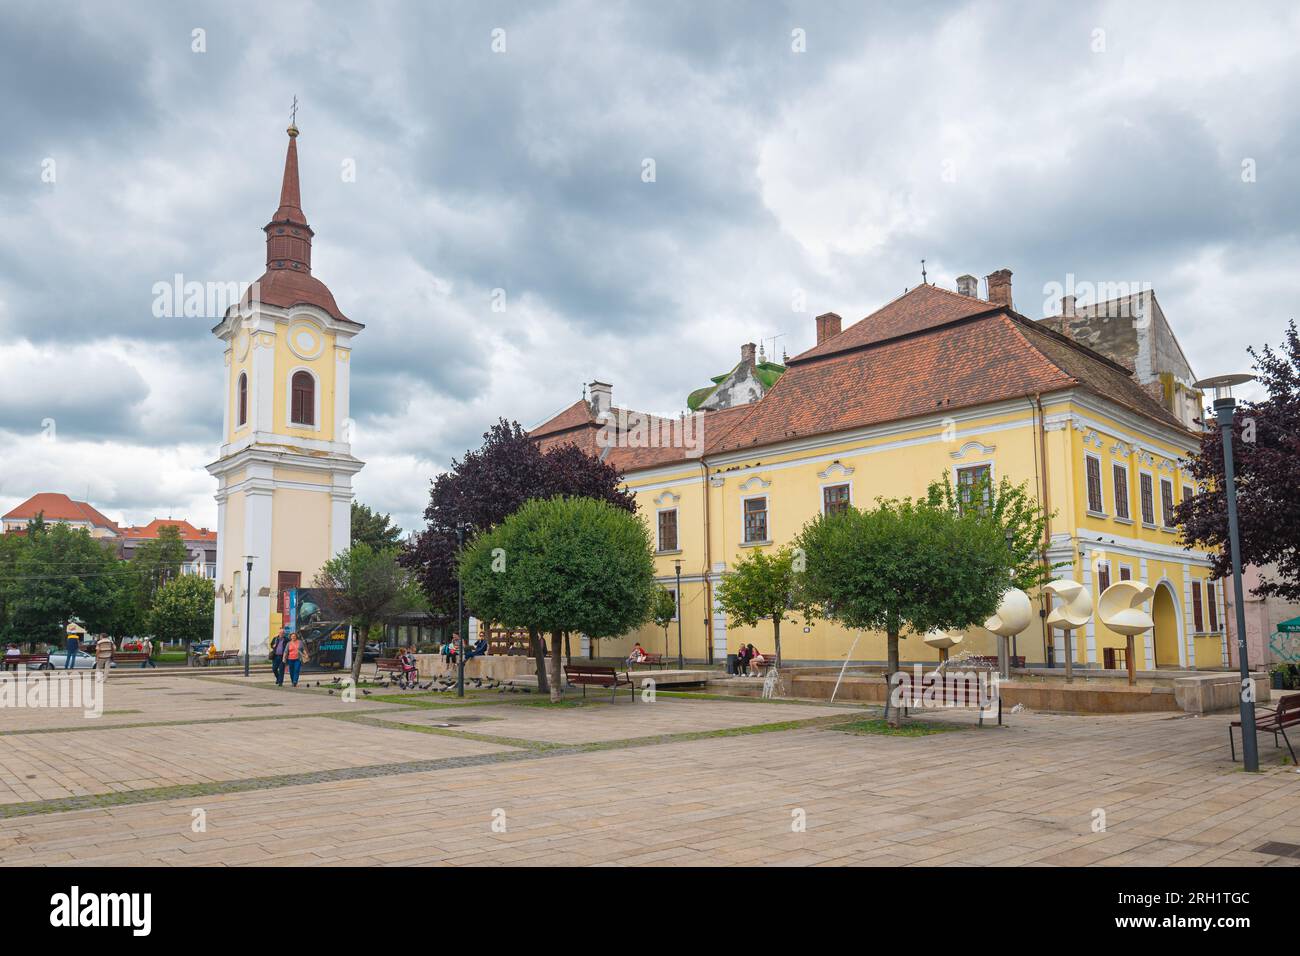 Scenic view of the former Franciscan Monastery Tower on a town square in the historic centre of Târgu Mureș, Romania. Stock Photo